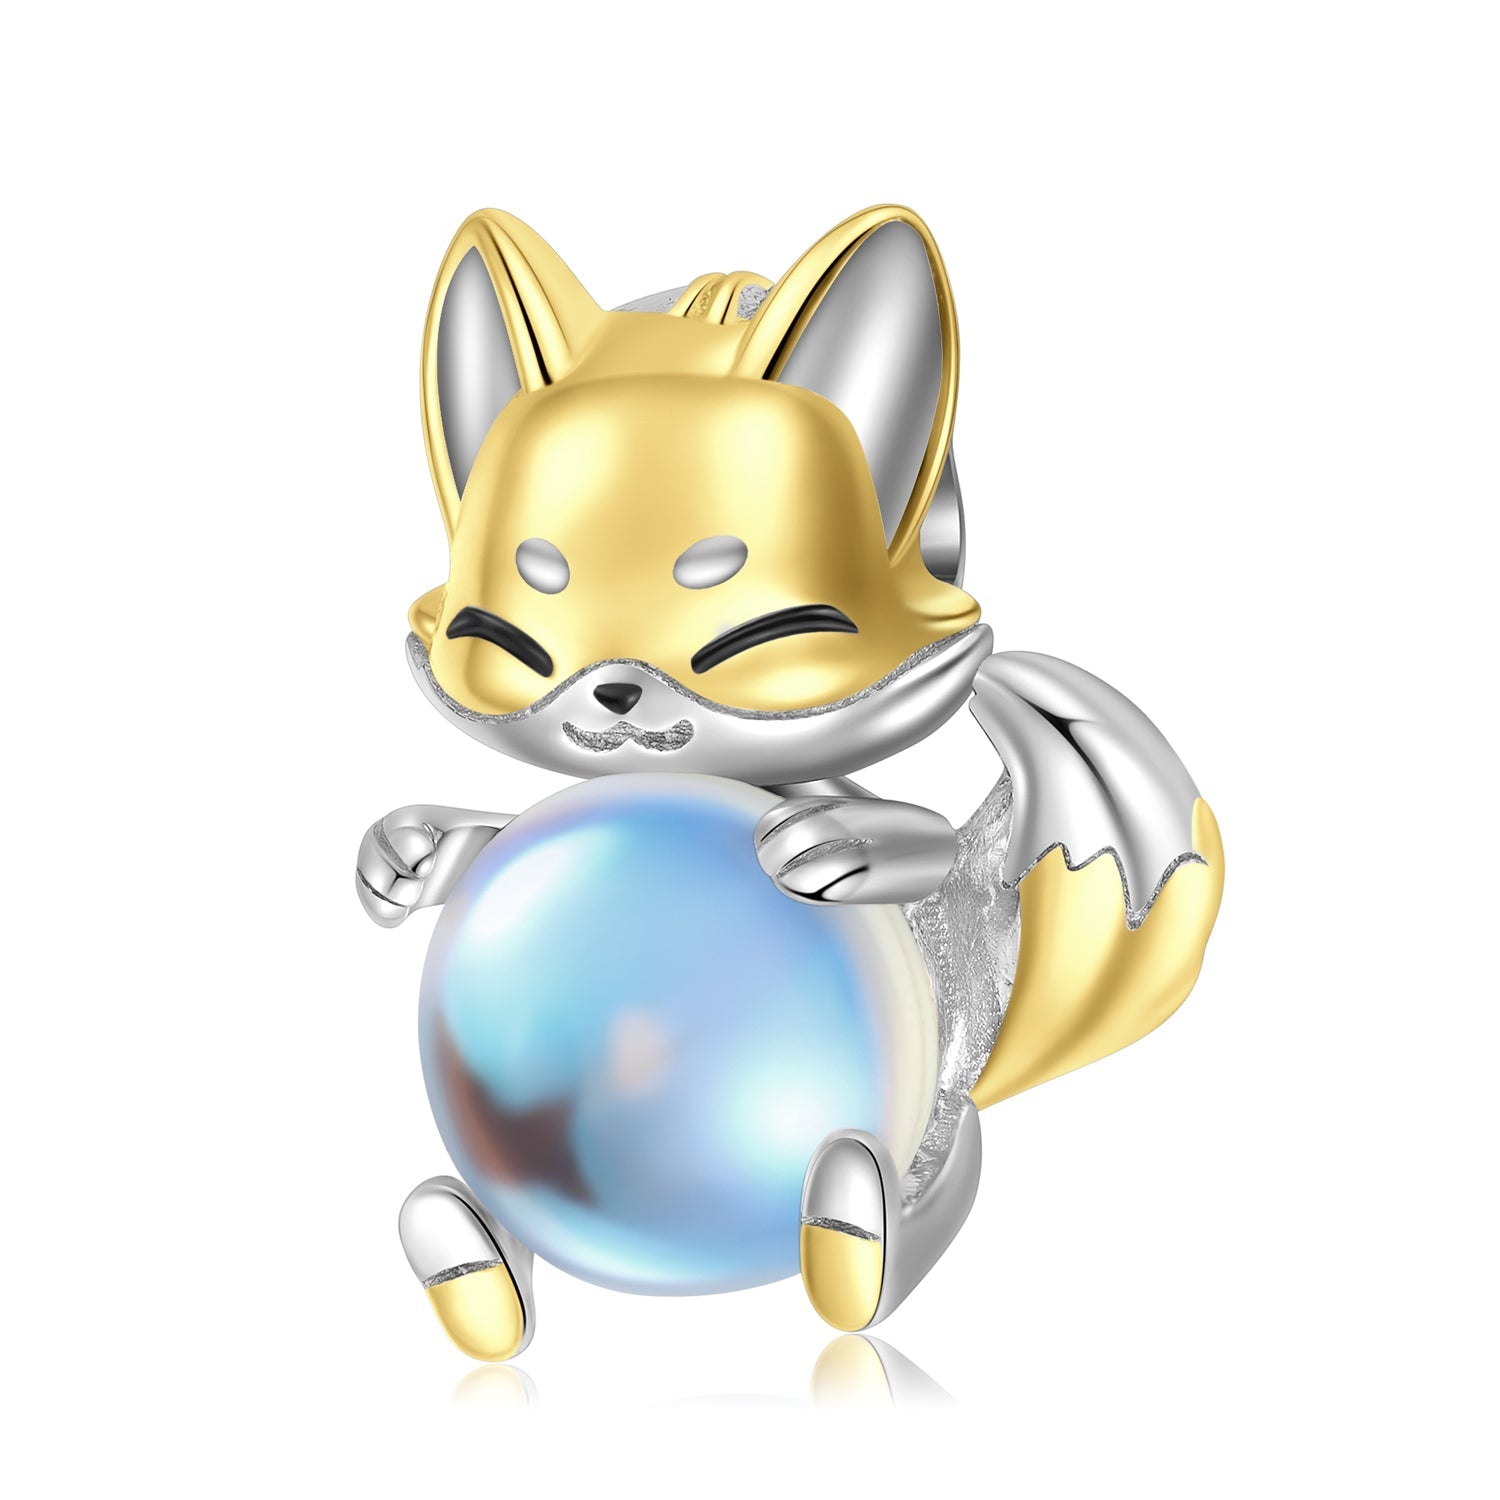 Golden fox with a pearl belly